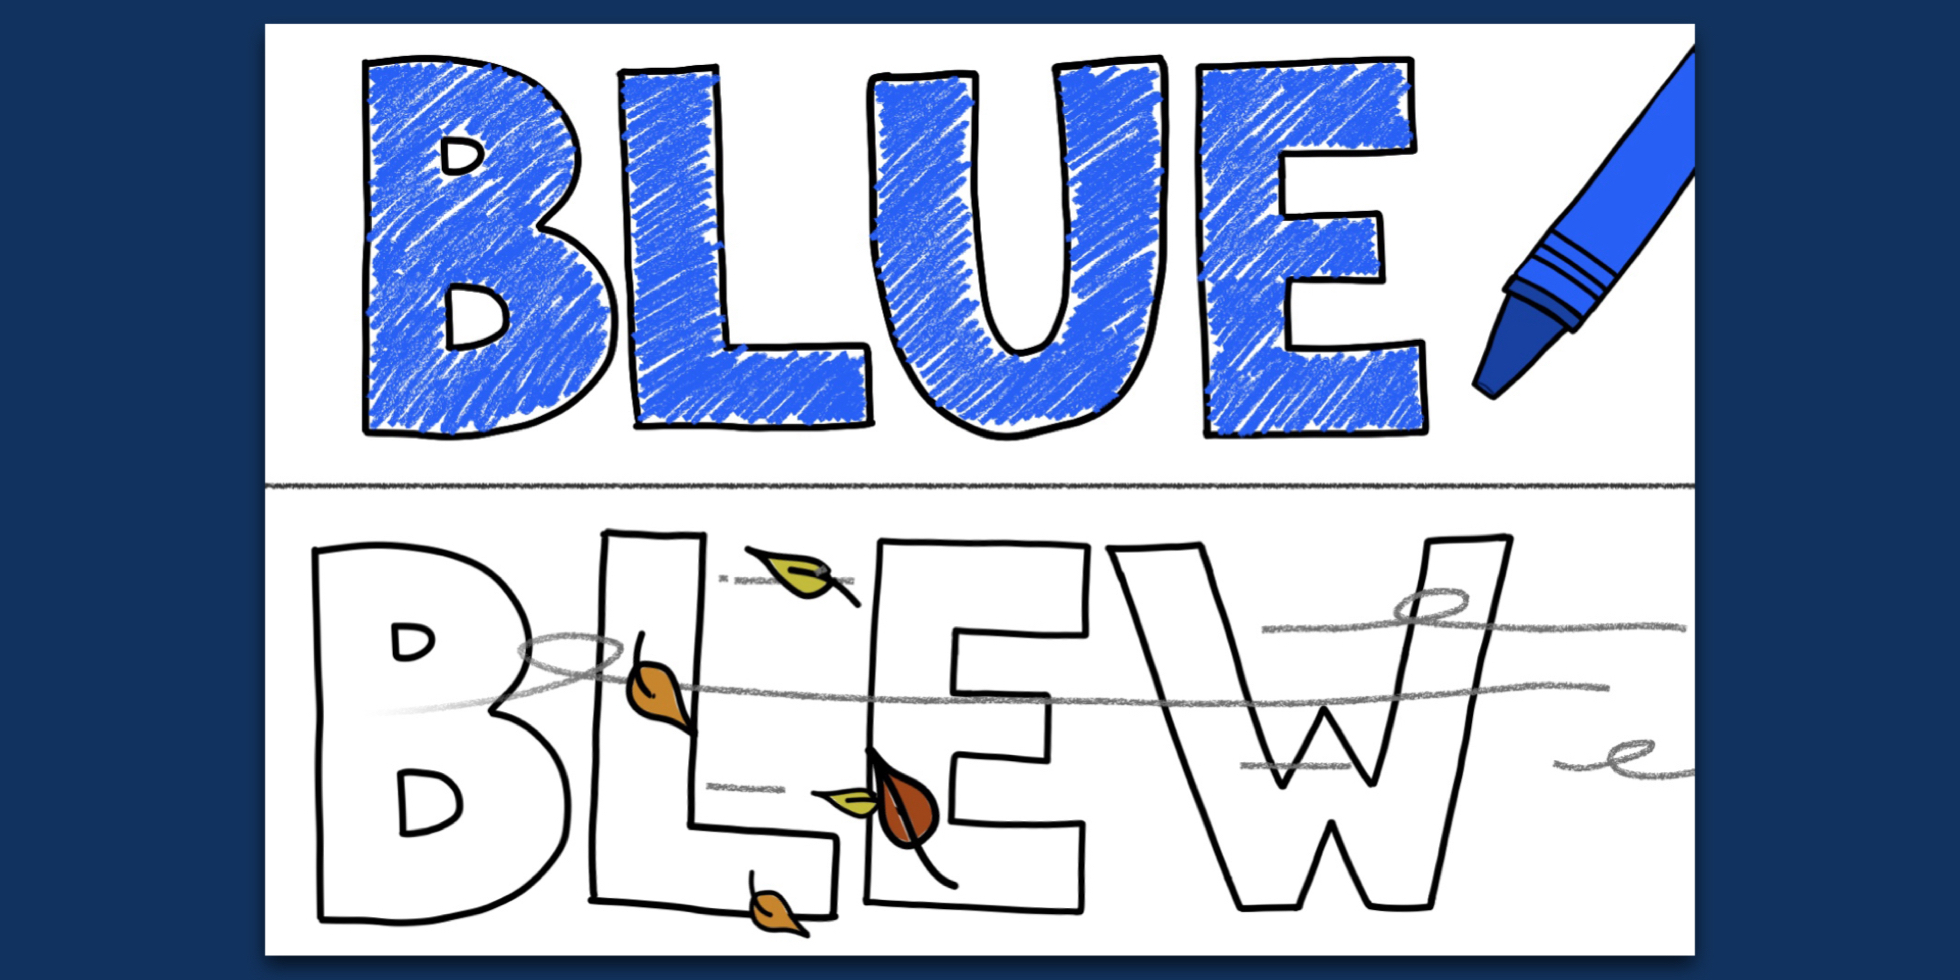 The words "BLUE" and "BLEW" are illustrated together with a blue crayon and leaves and wind.